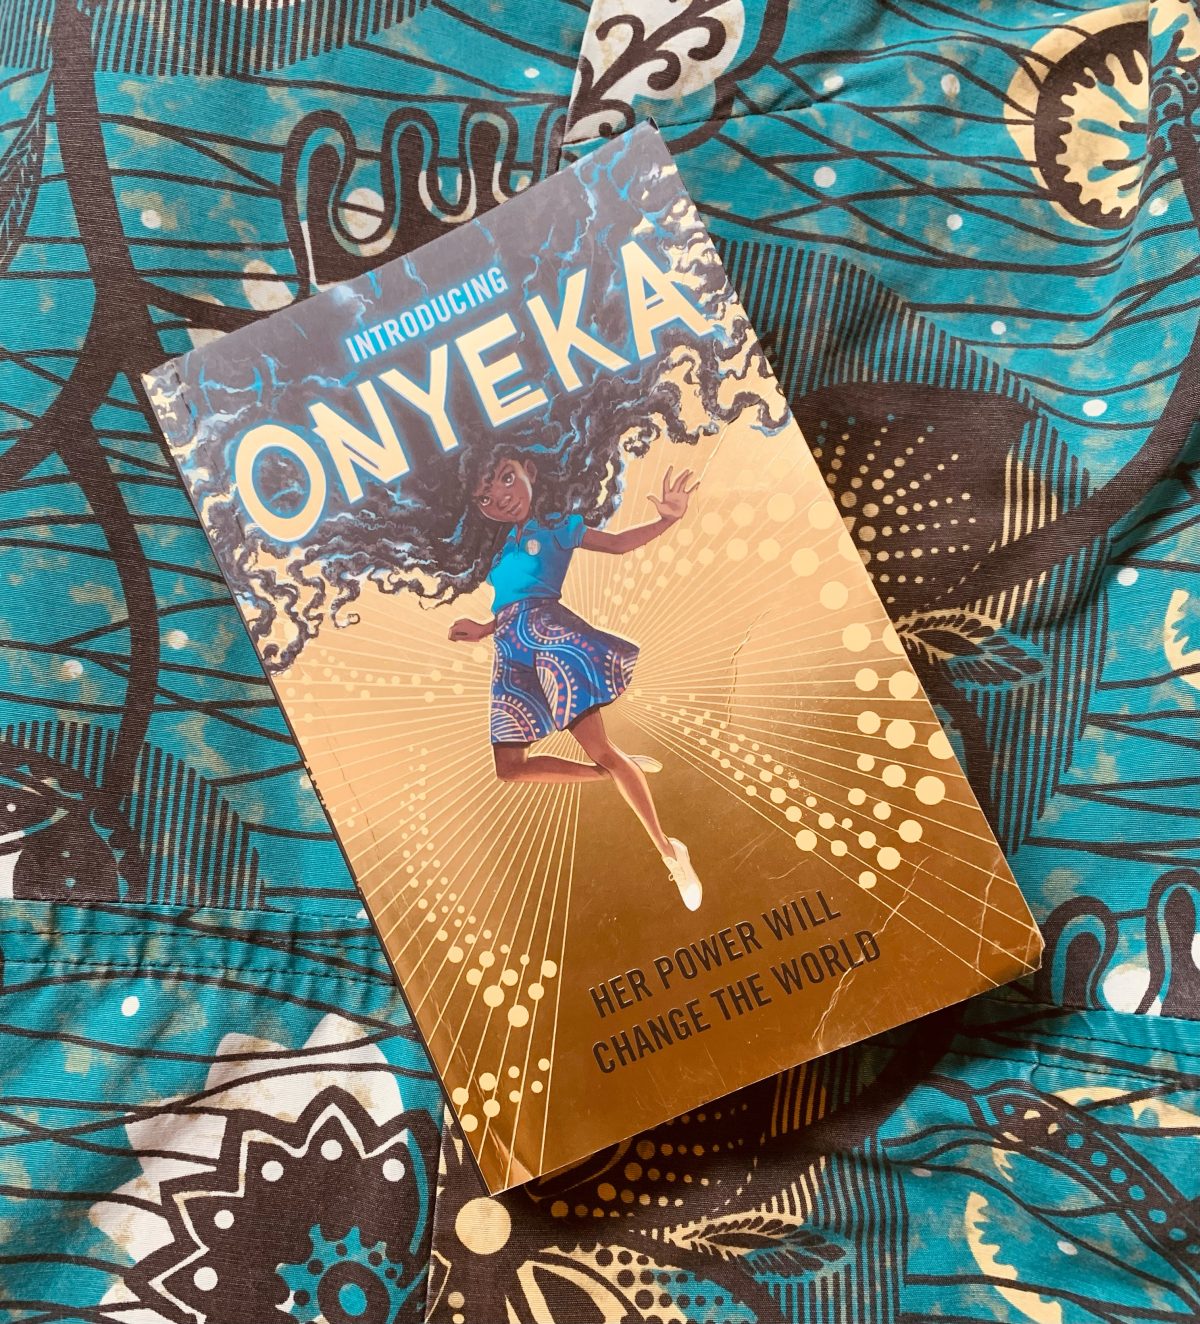 Onyeka and the Academy of the Sun by Tọlá Okogwu, reviewed by Mia